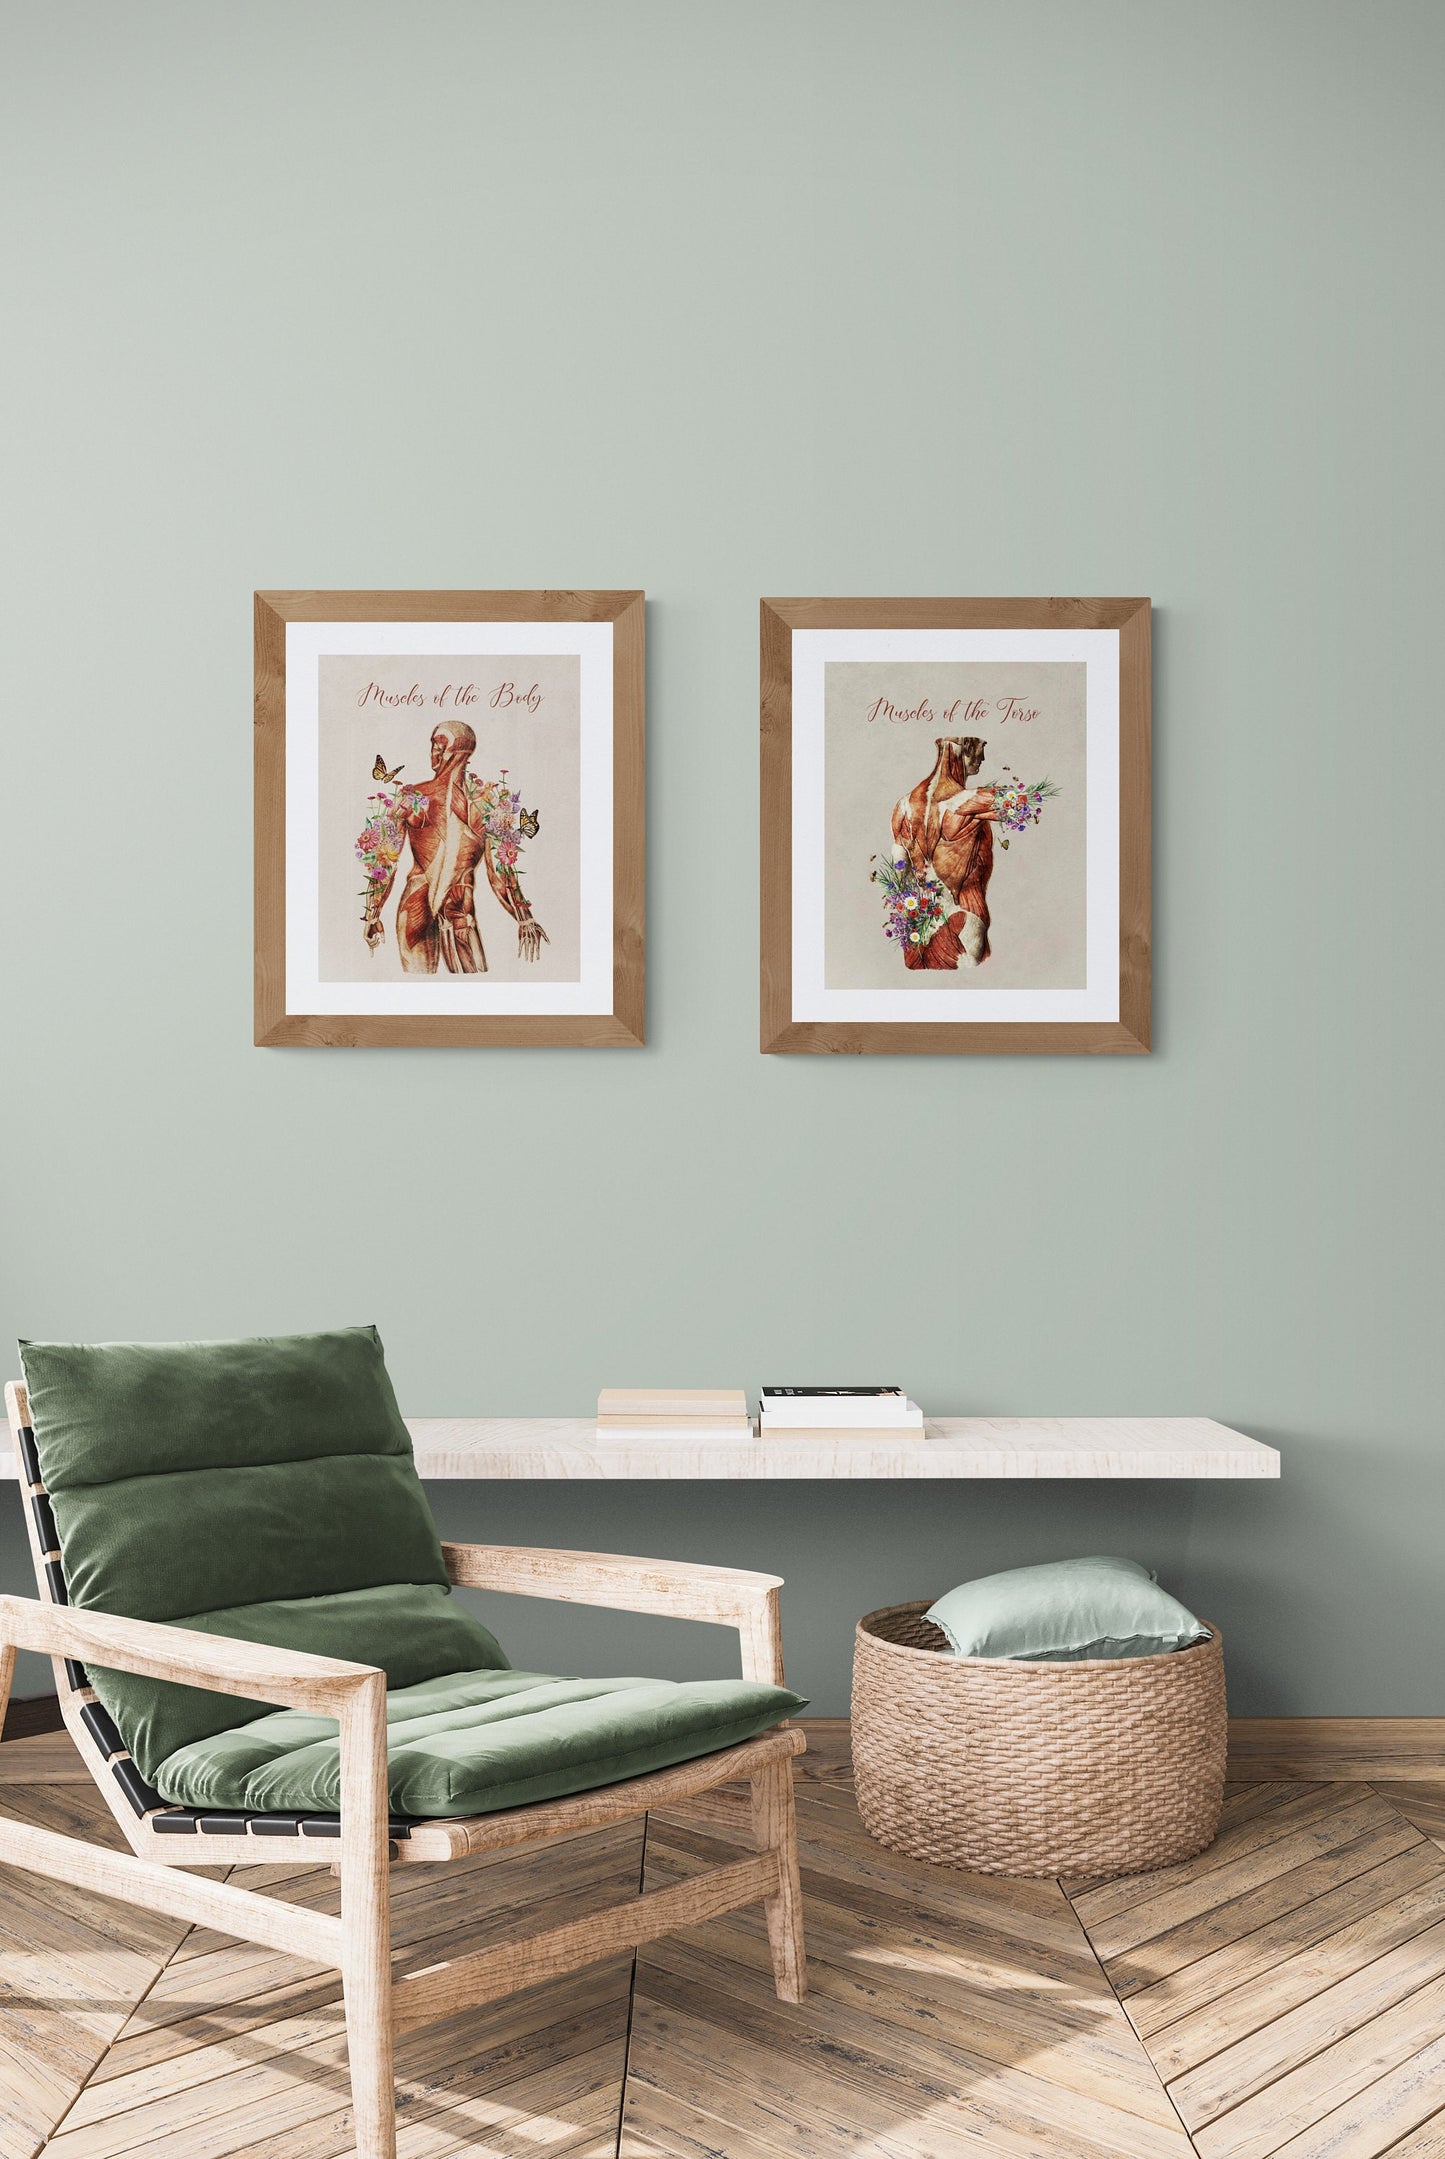 Vintage "Muscles of the Body" Muscular Picture for Massage Therapist Office or Home (Several Choices)